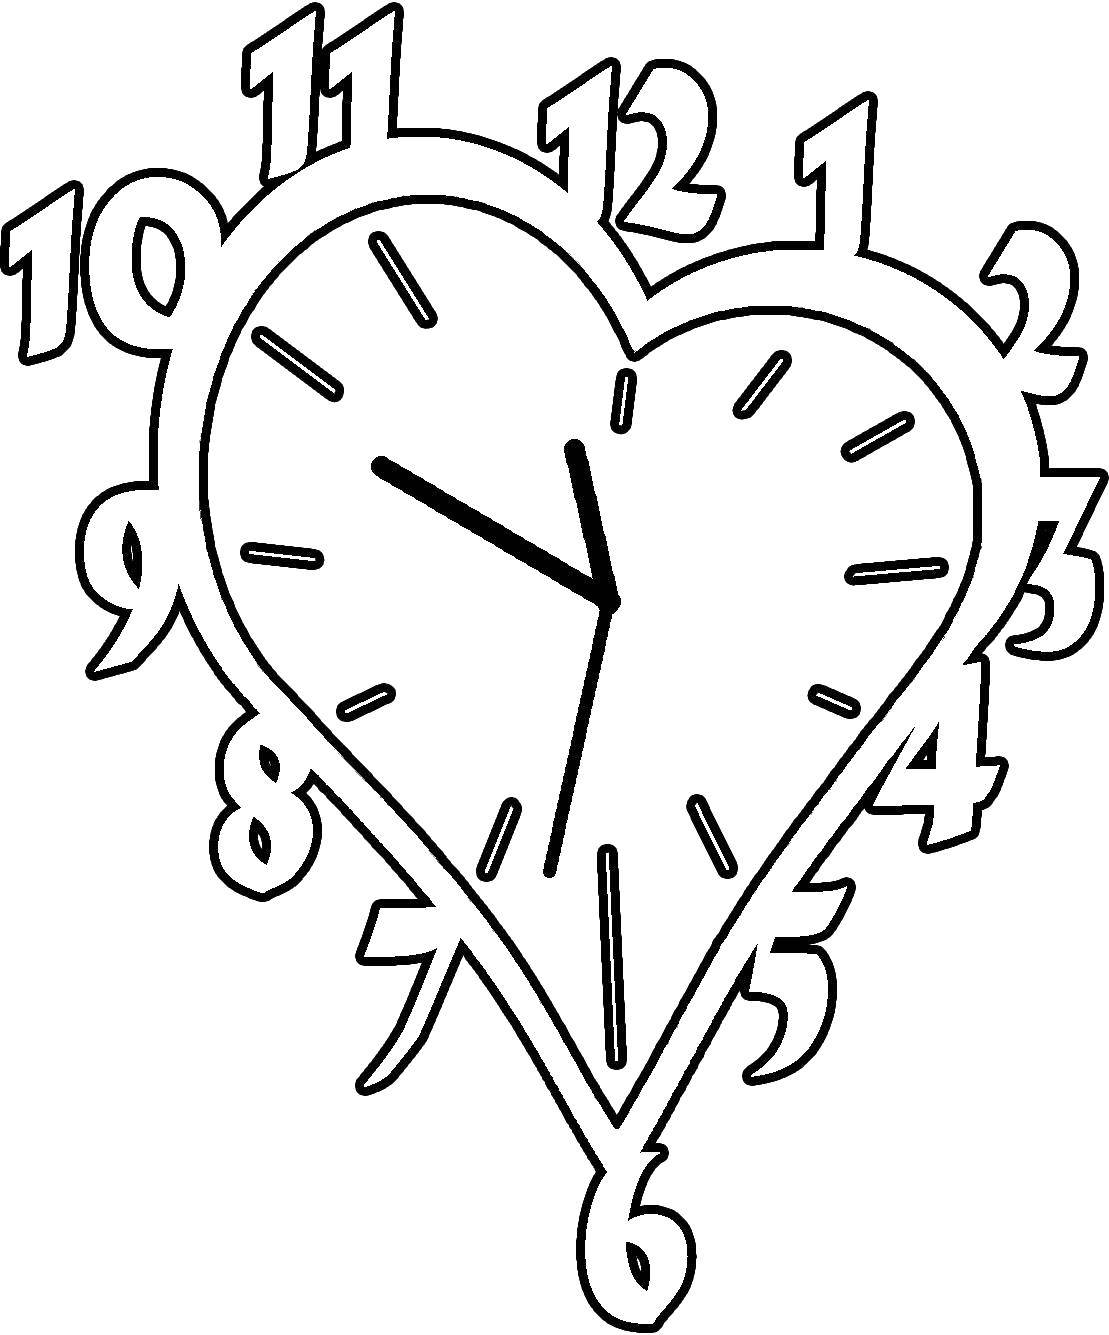 Coloring Watch heart. Category Watch. Tags:  Watch.